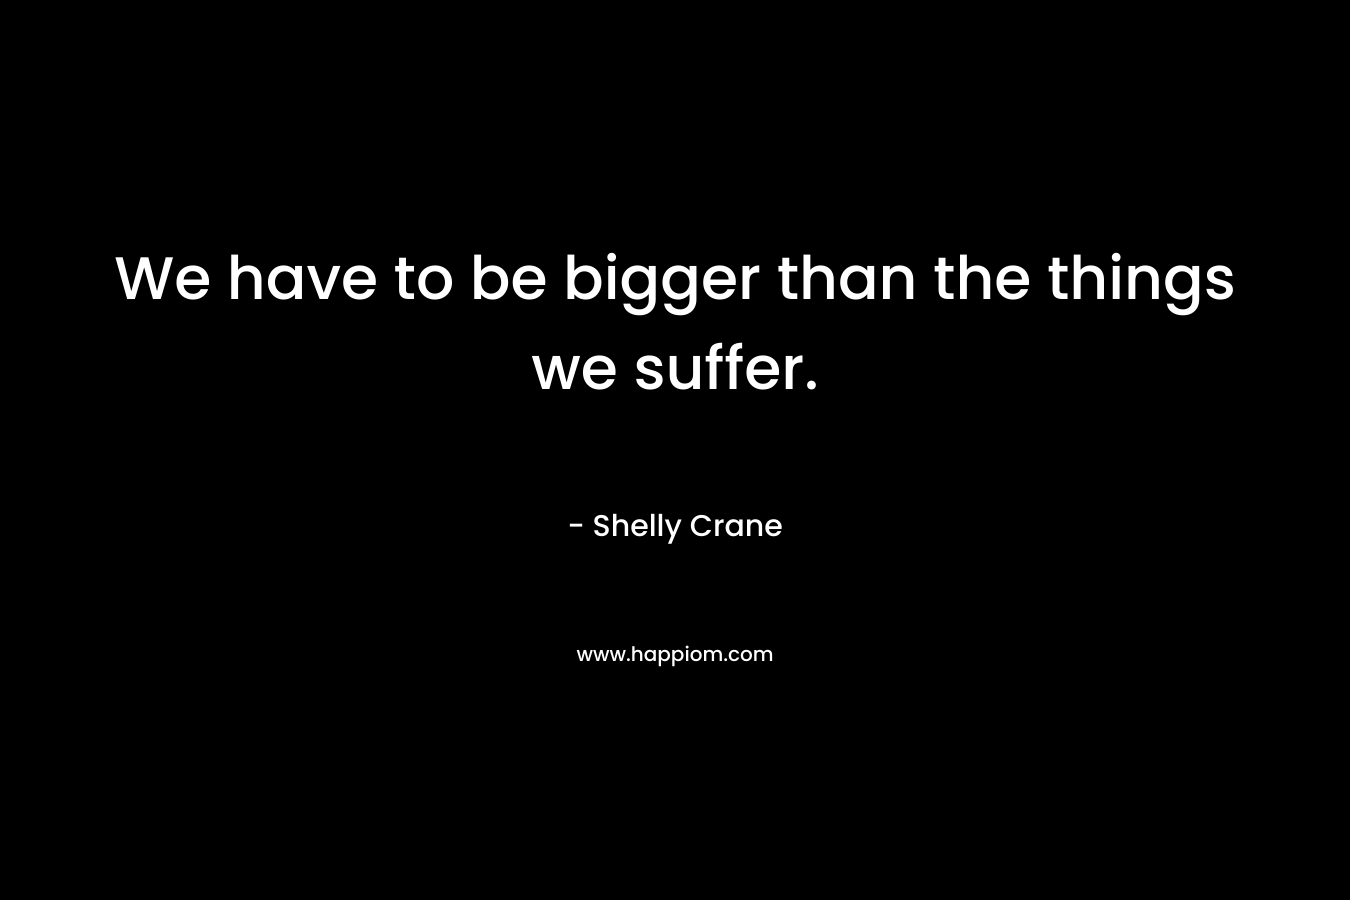 We have to be bigger than the things we suffer. – Shelly Crane